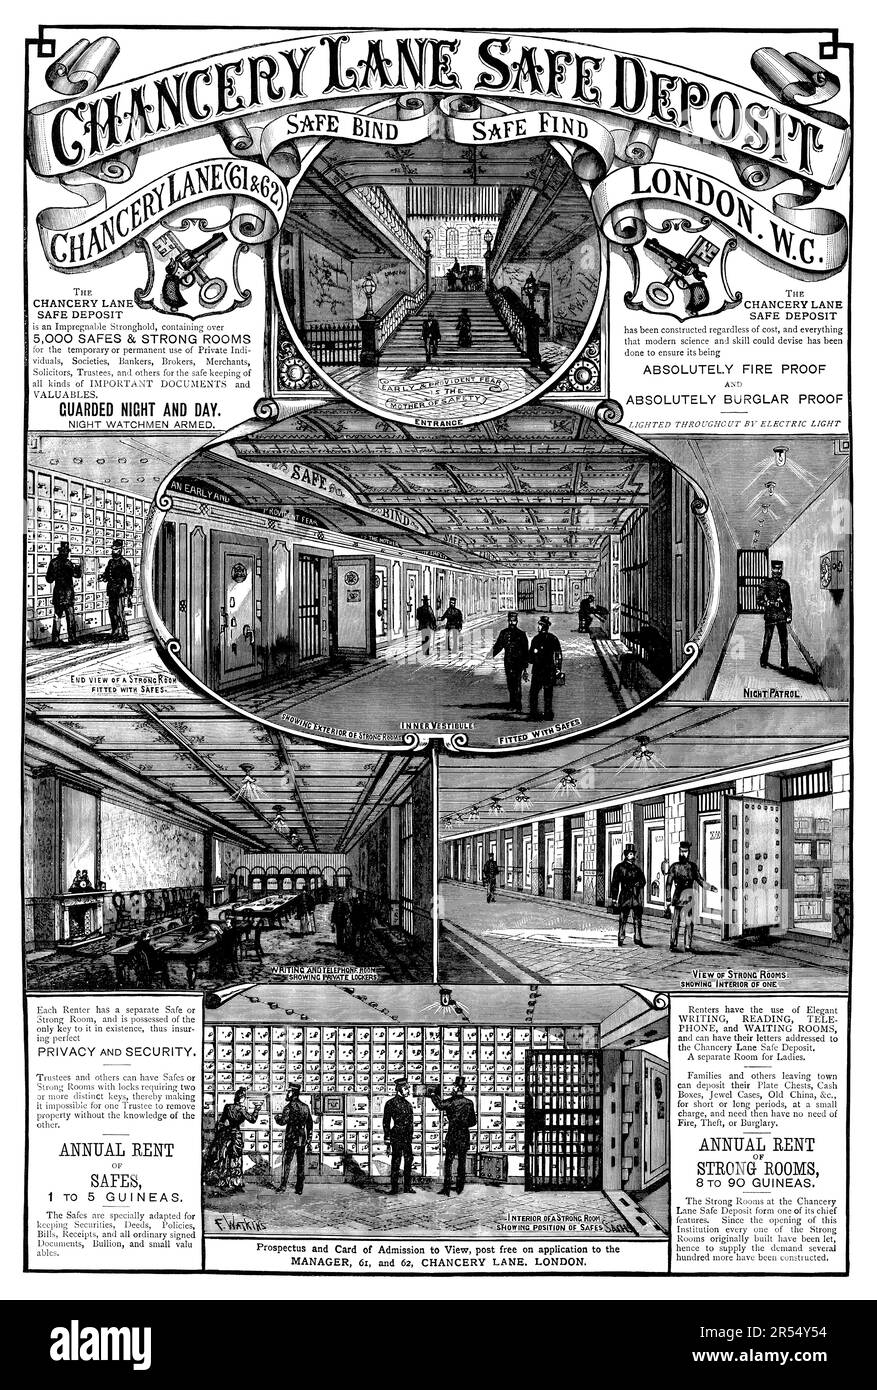 1887 British advertisement for the Chancery Lane Safe Deposit in London, England. Stock Photo